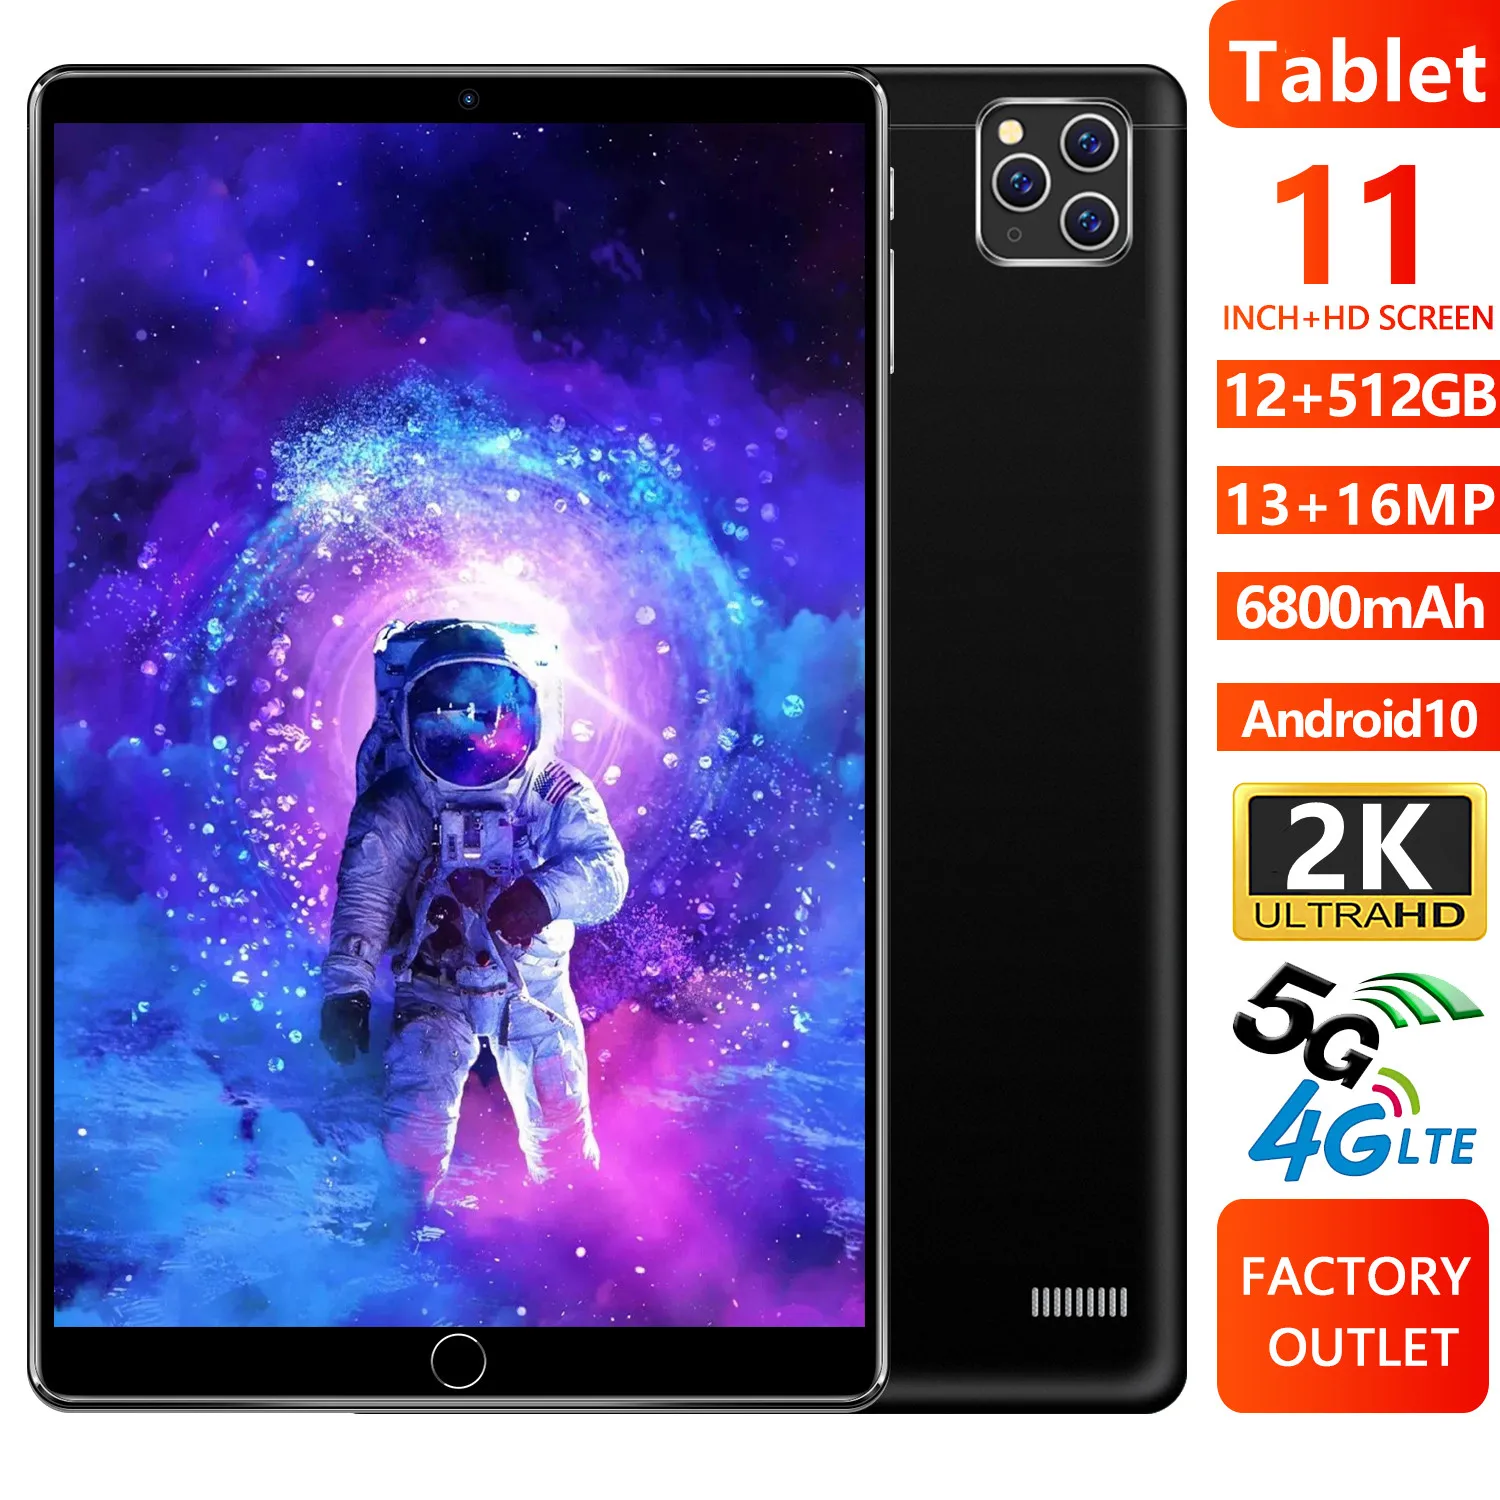 Speaker Phone Tablet Pad Pro 11 Inch 12GB RAM 512GB ROM Tablets Android 10.0 Dual Call GPS Bluetooth Google Play